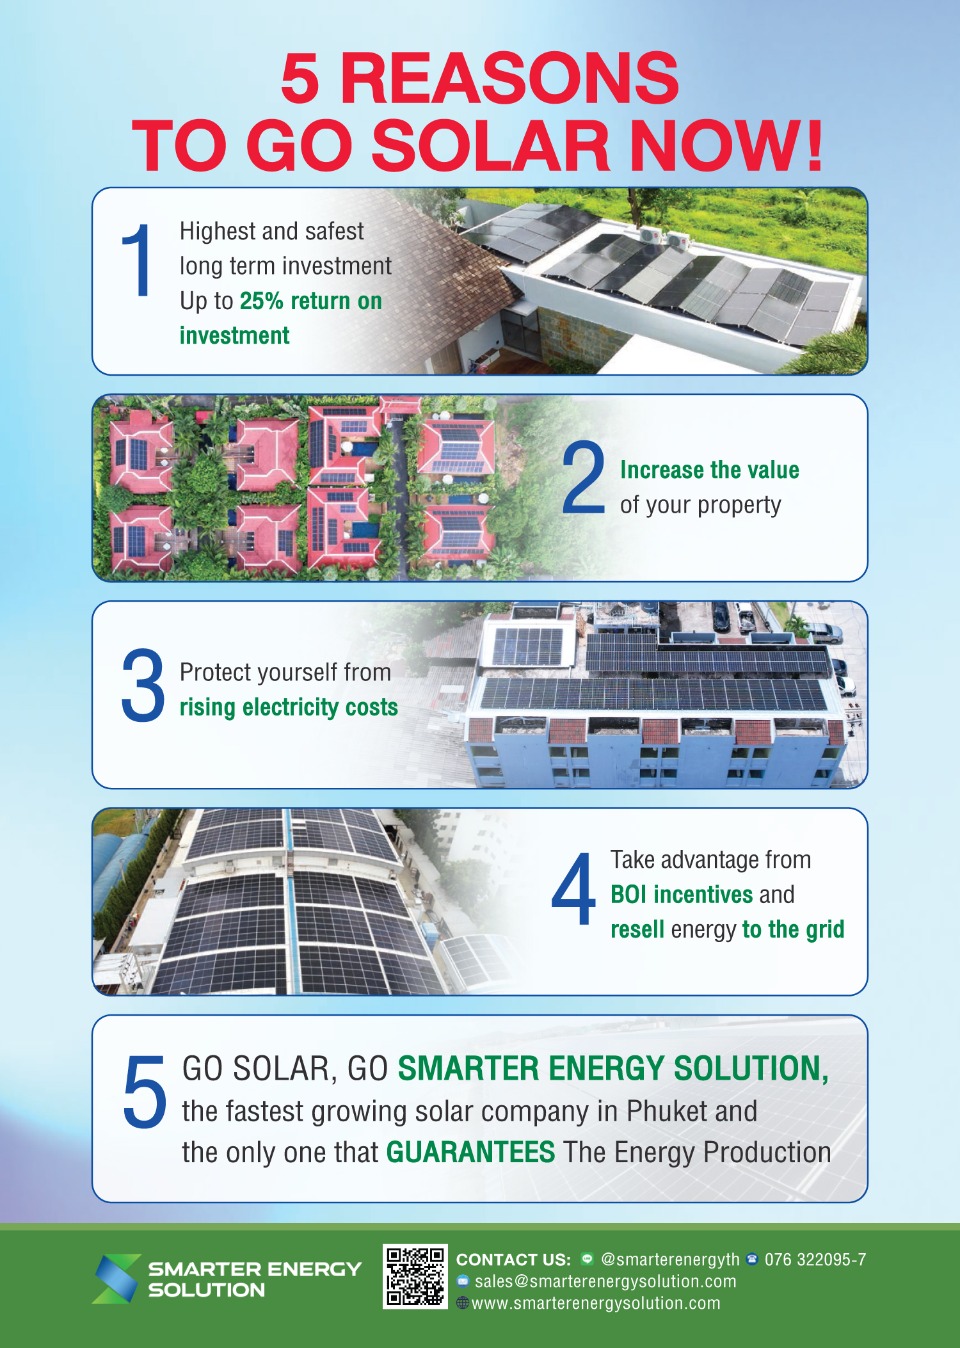 5 Reasons to GO SOLAR NOW!